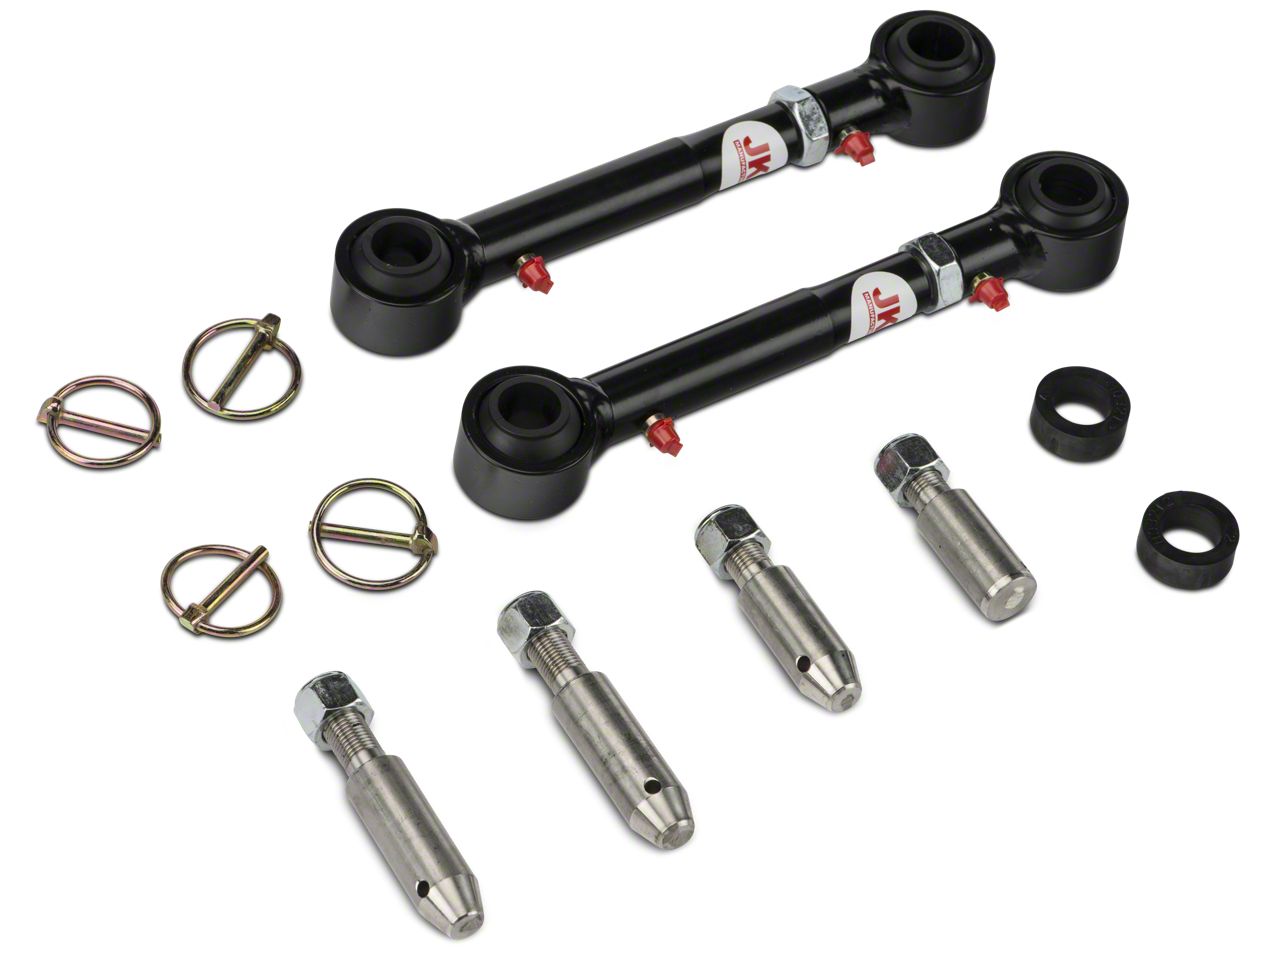 Jeep Sway Bars, Links & Disconnects 2007-2018 JK